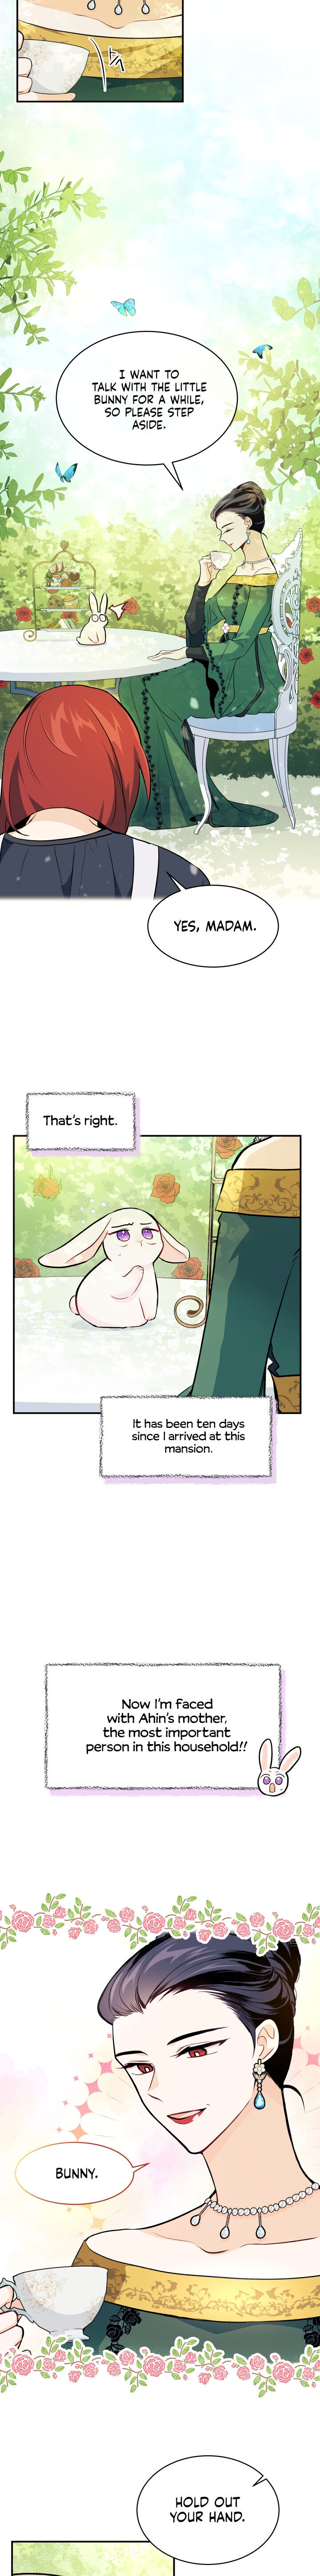 The Symbiotic Relationship Between A Rabbit and A Black Panther - Chapter 5 Page 4